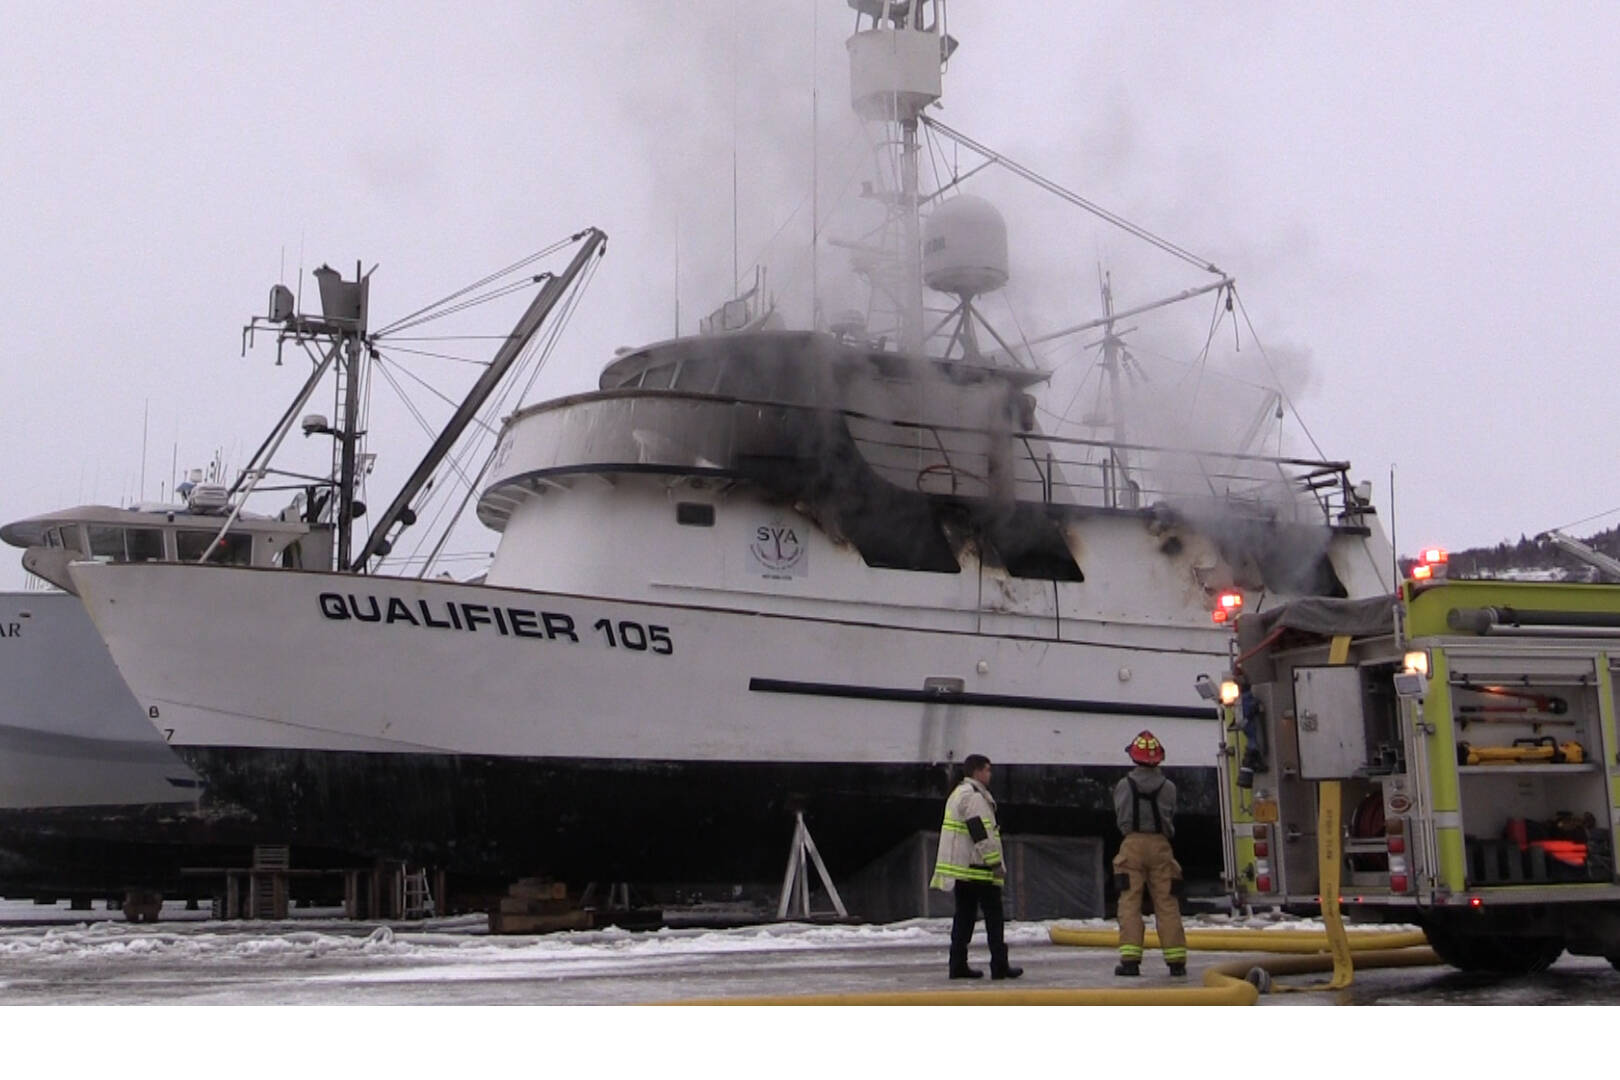 Emergency personnel respond to a fire on R/V Qualifier, in the Northern Enterprises Boatyard on Kachemak Drive, Jan. 19, 2023, in Homer, Alaska. (Photos by Nika Wolfe)